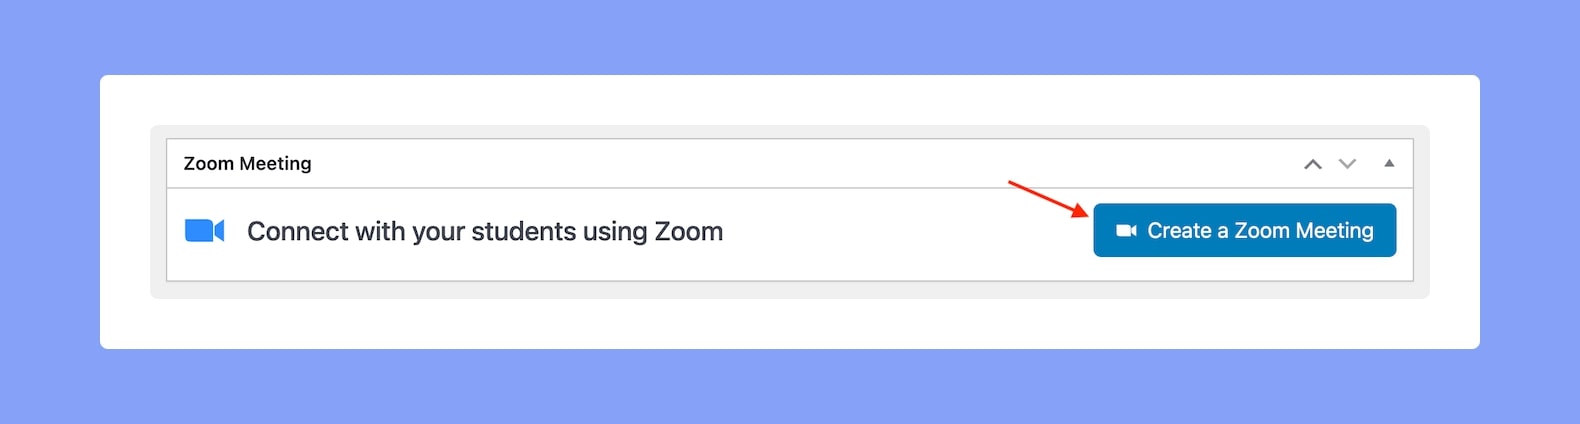 Tutor LMS Zoom Meeting Button